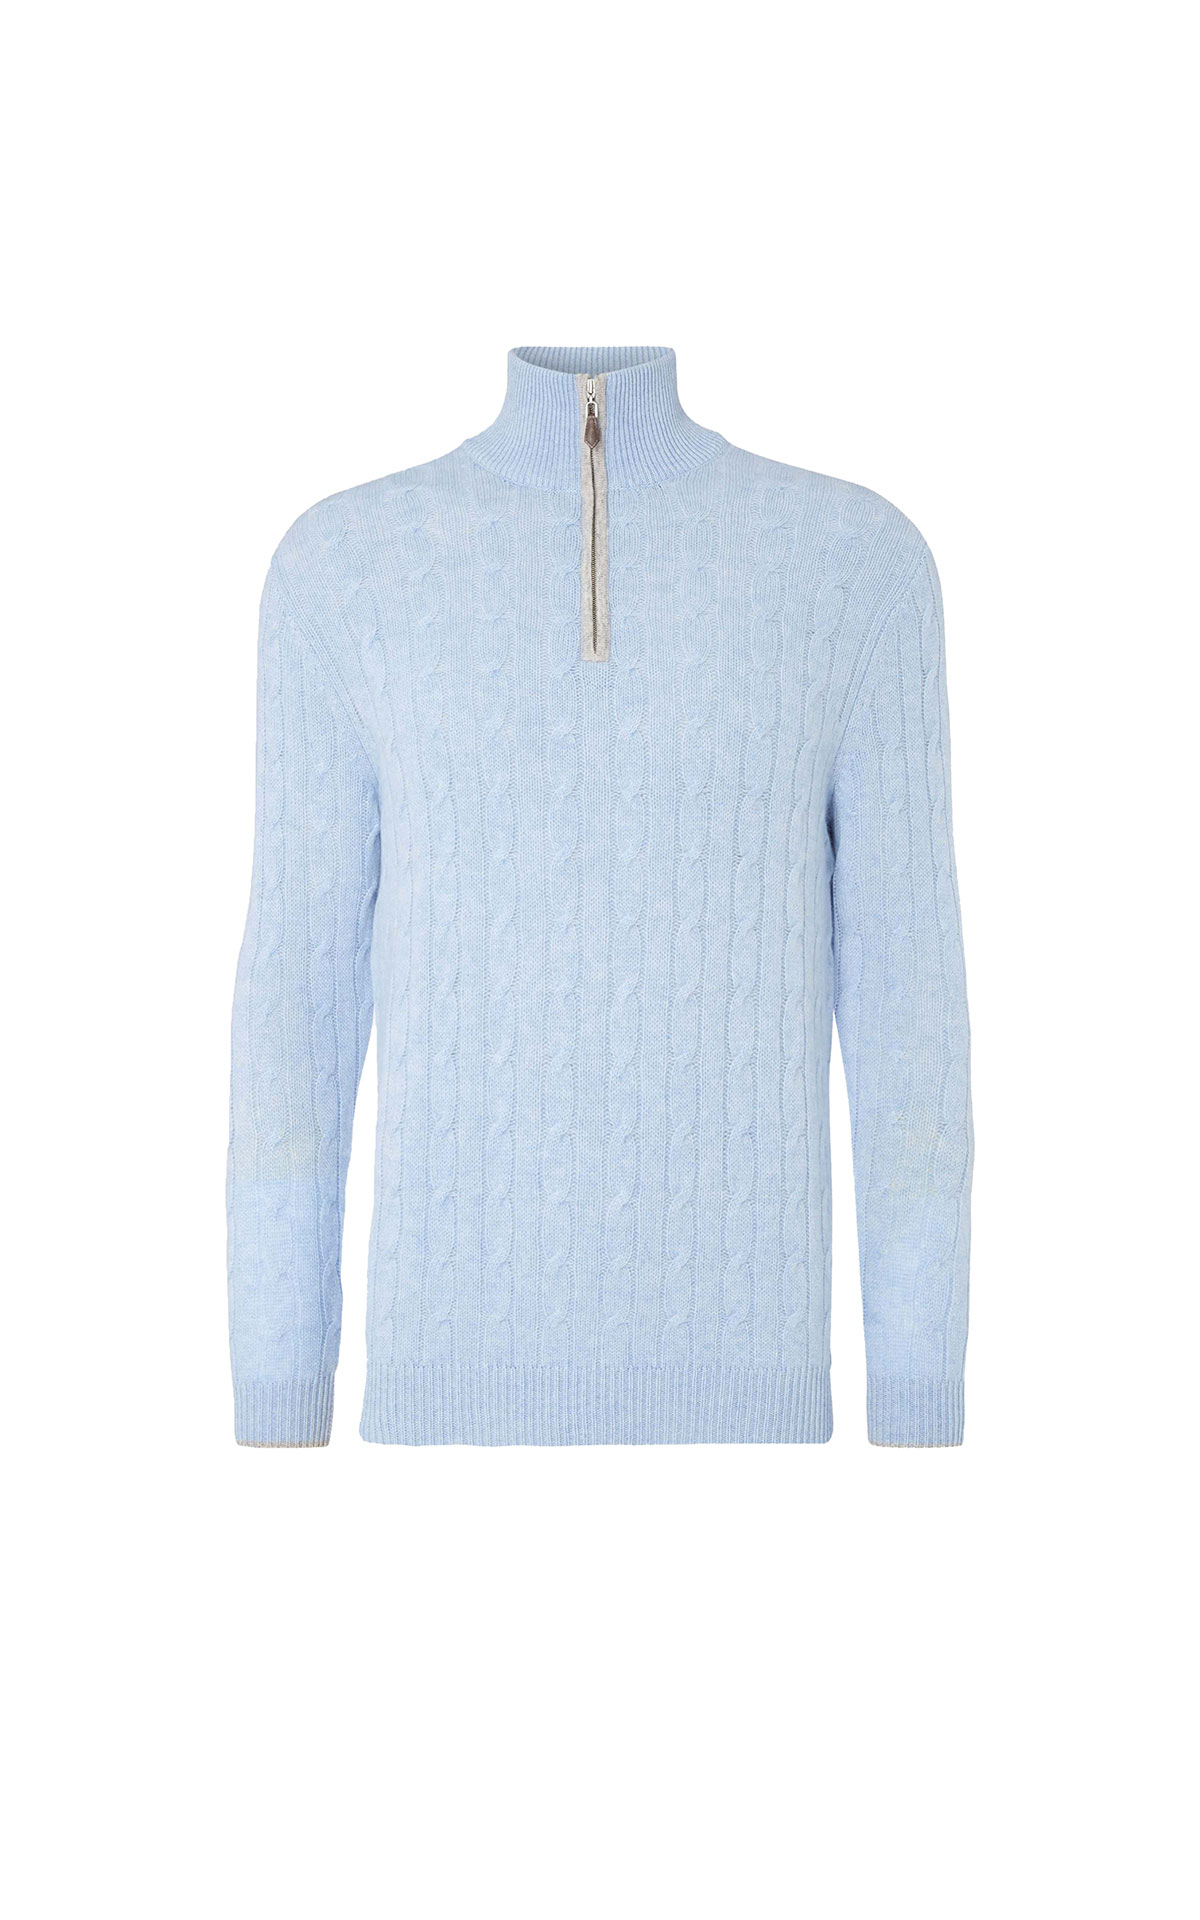 N.Peal Men’s cable 1/2 zip  from Bicester Village